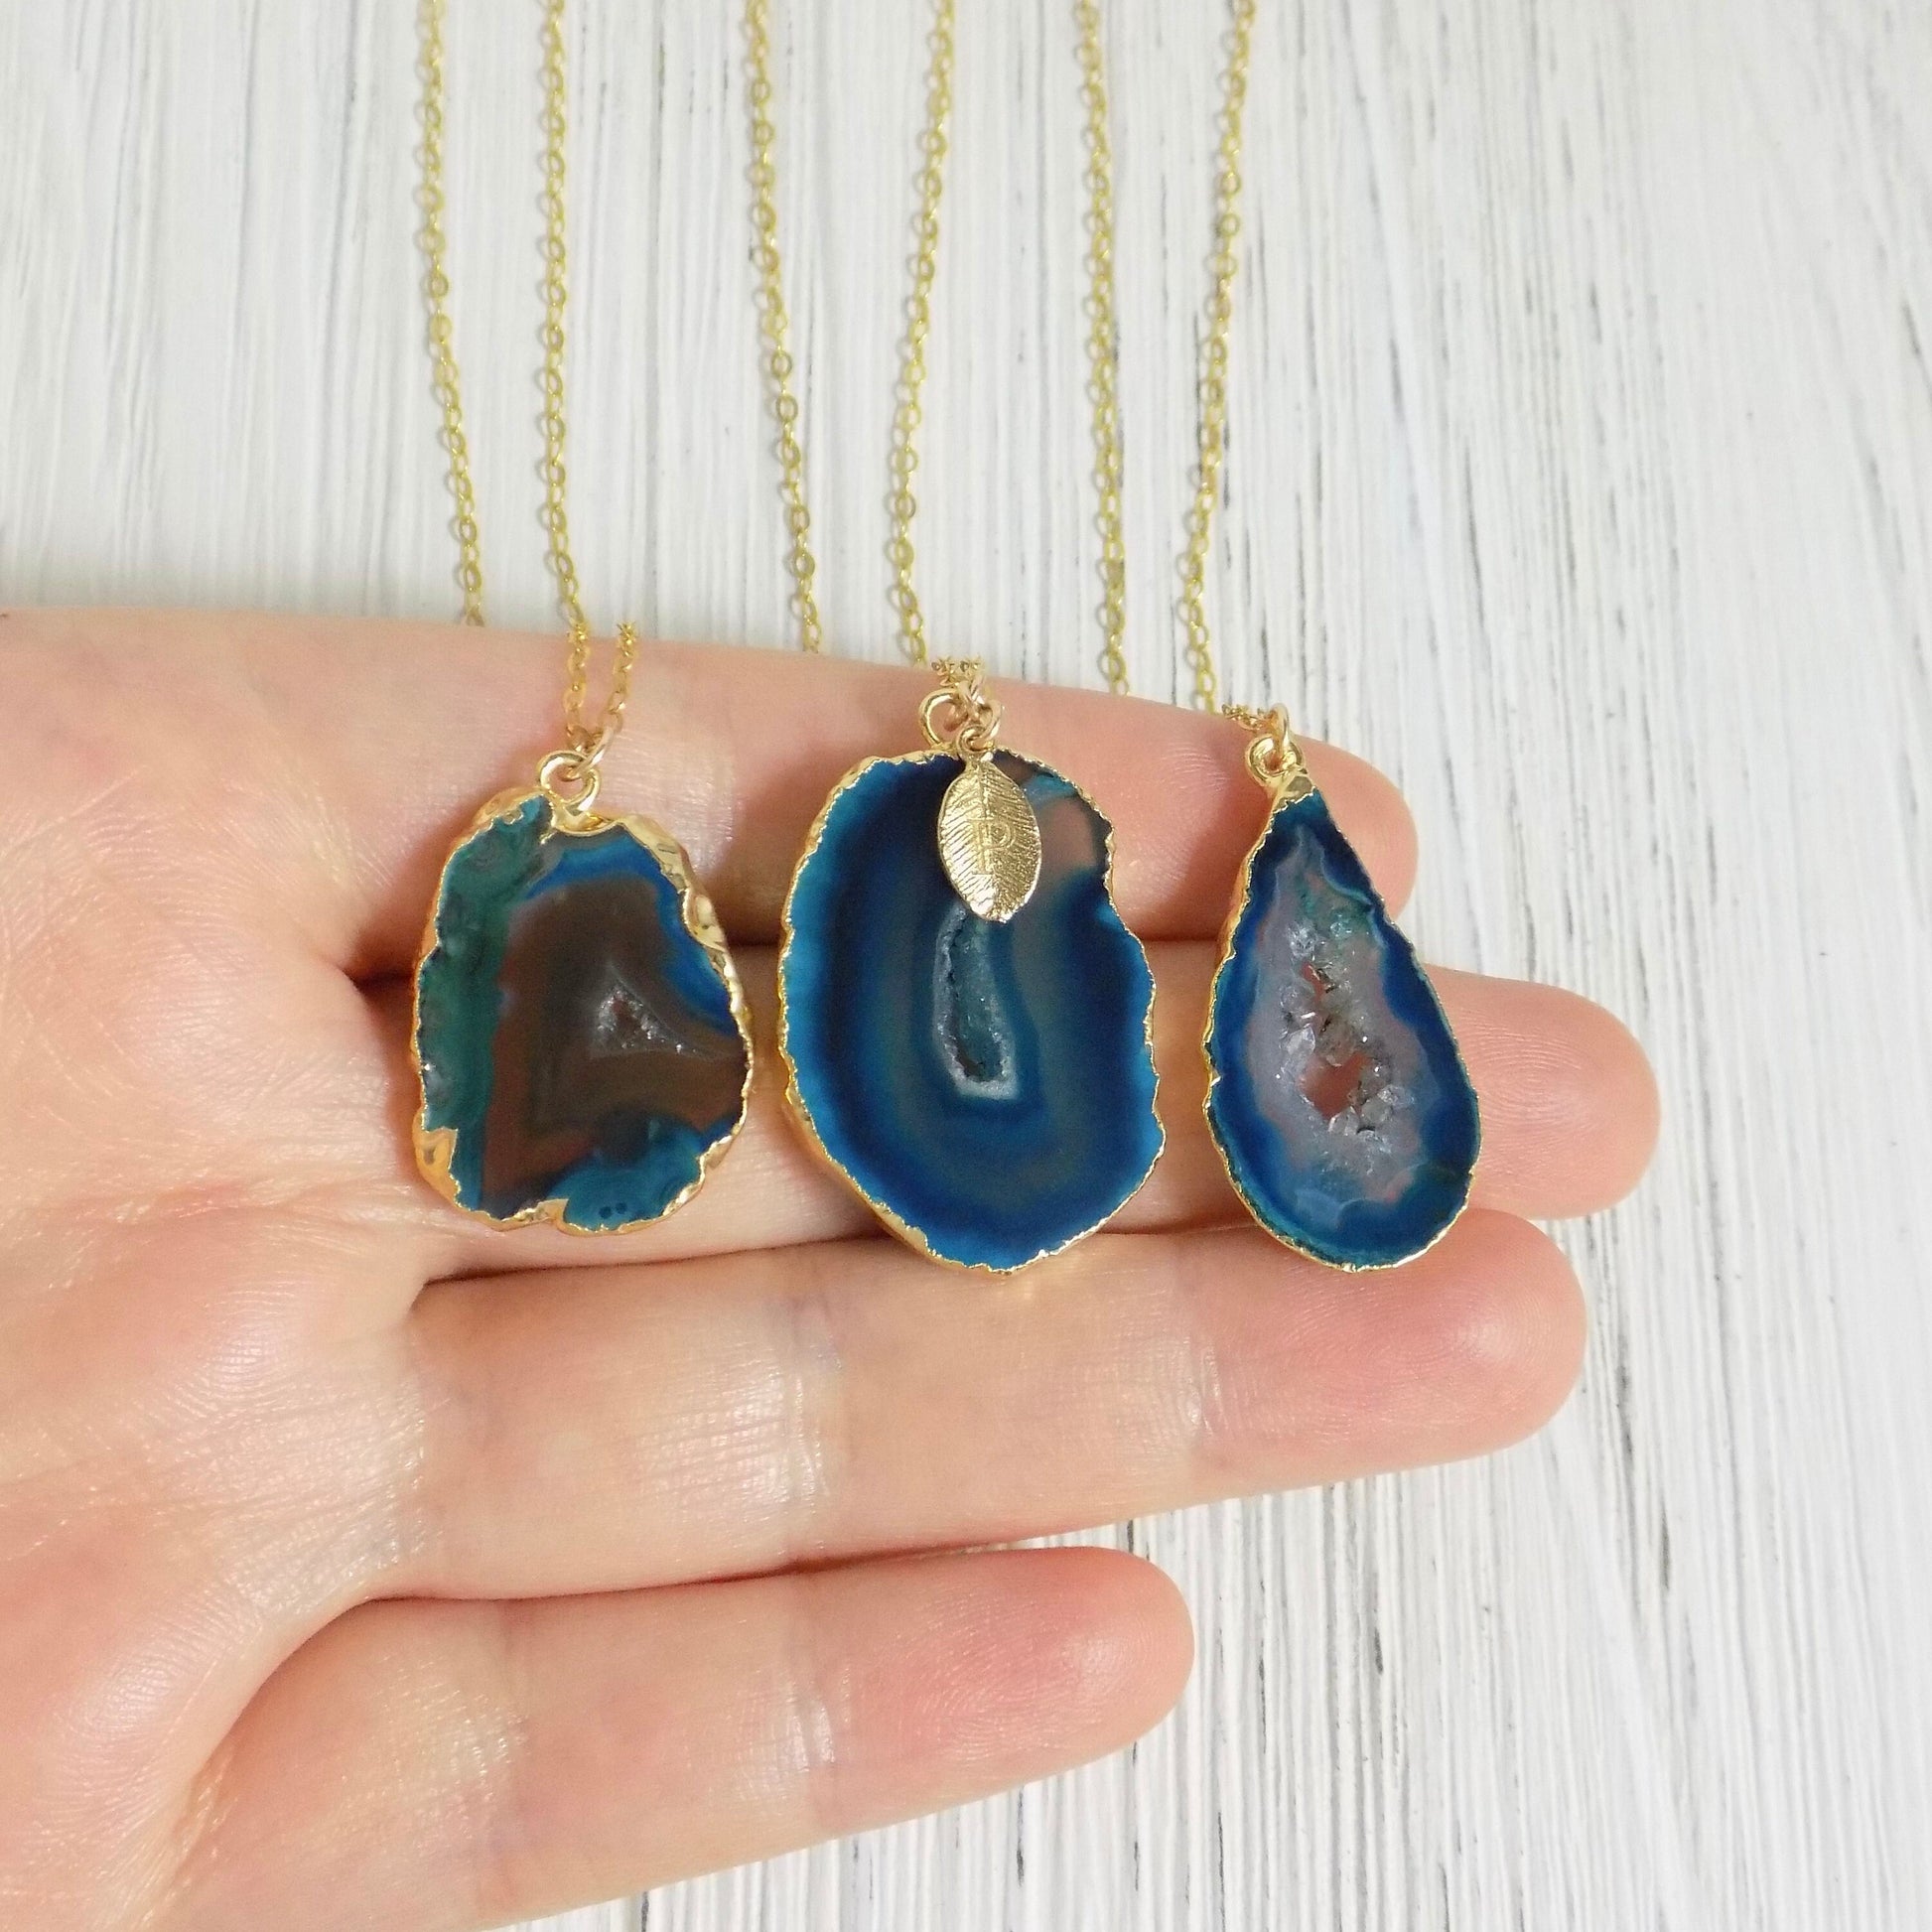 Small Geode Necklace Gold - Personalized Turquoise Stone Necklace